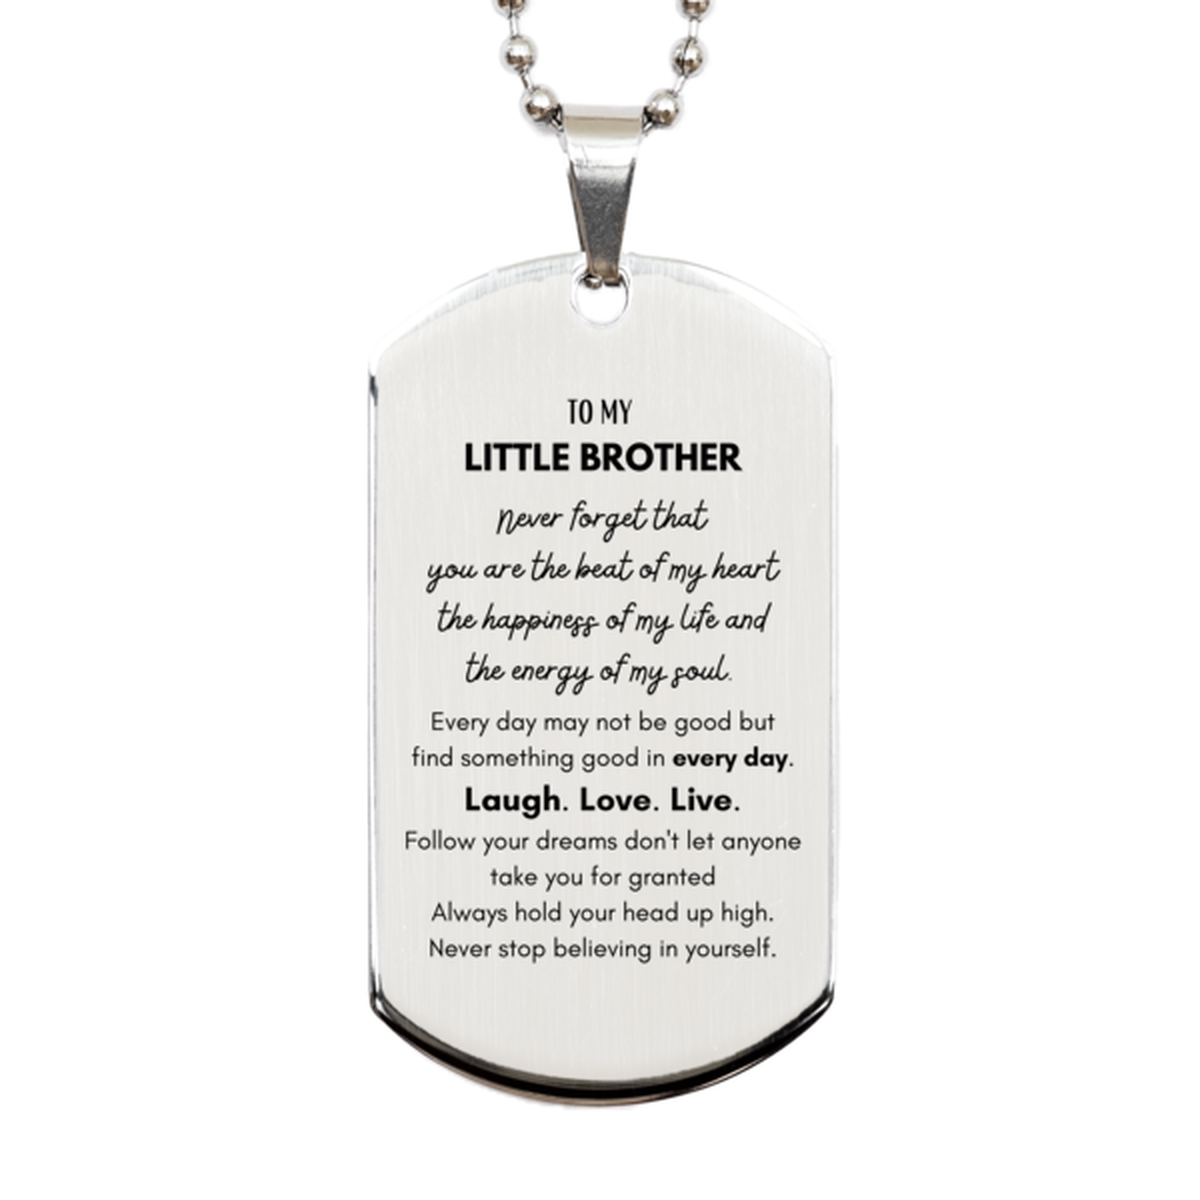 To My Little Brother Dogtag Gifts, Christmas Little Brother Silver Dog Tag Present, Birthday Unique Motivational For Little Brother, To My Little Brother Never forget that you are the beat of my heart the happiness of my life and the energy of my soul